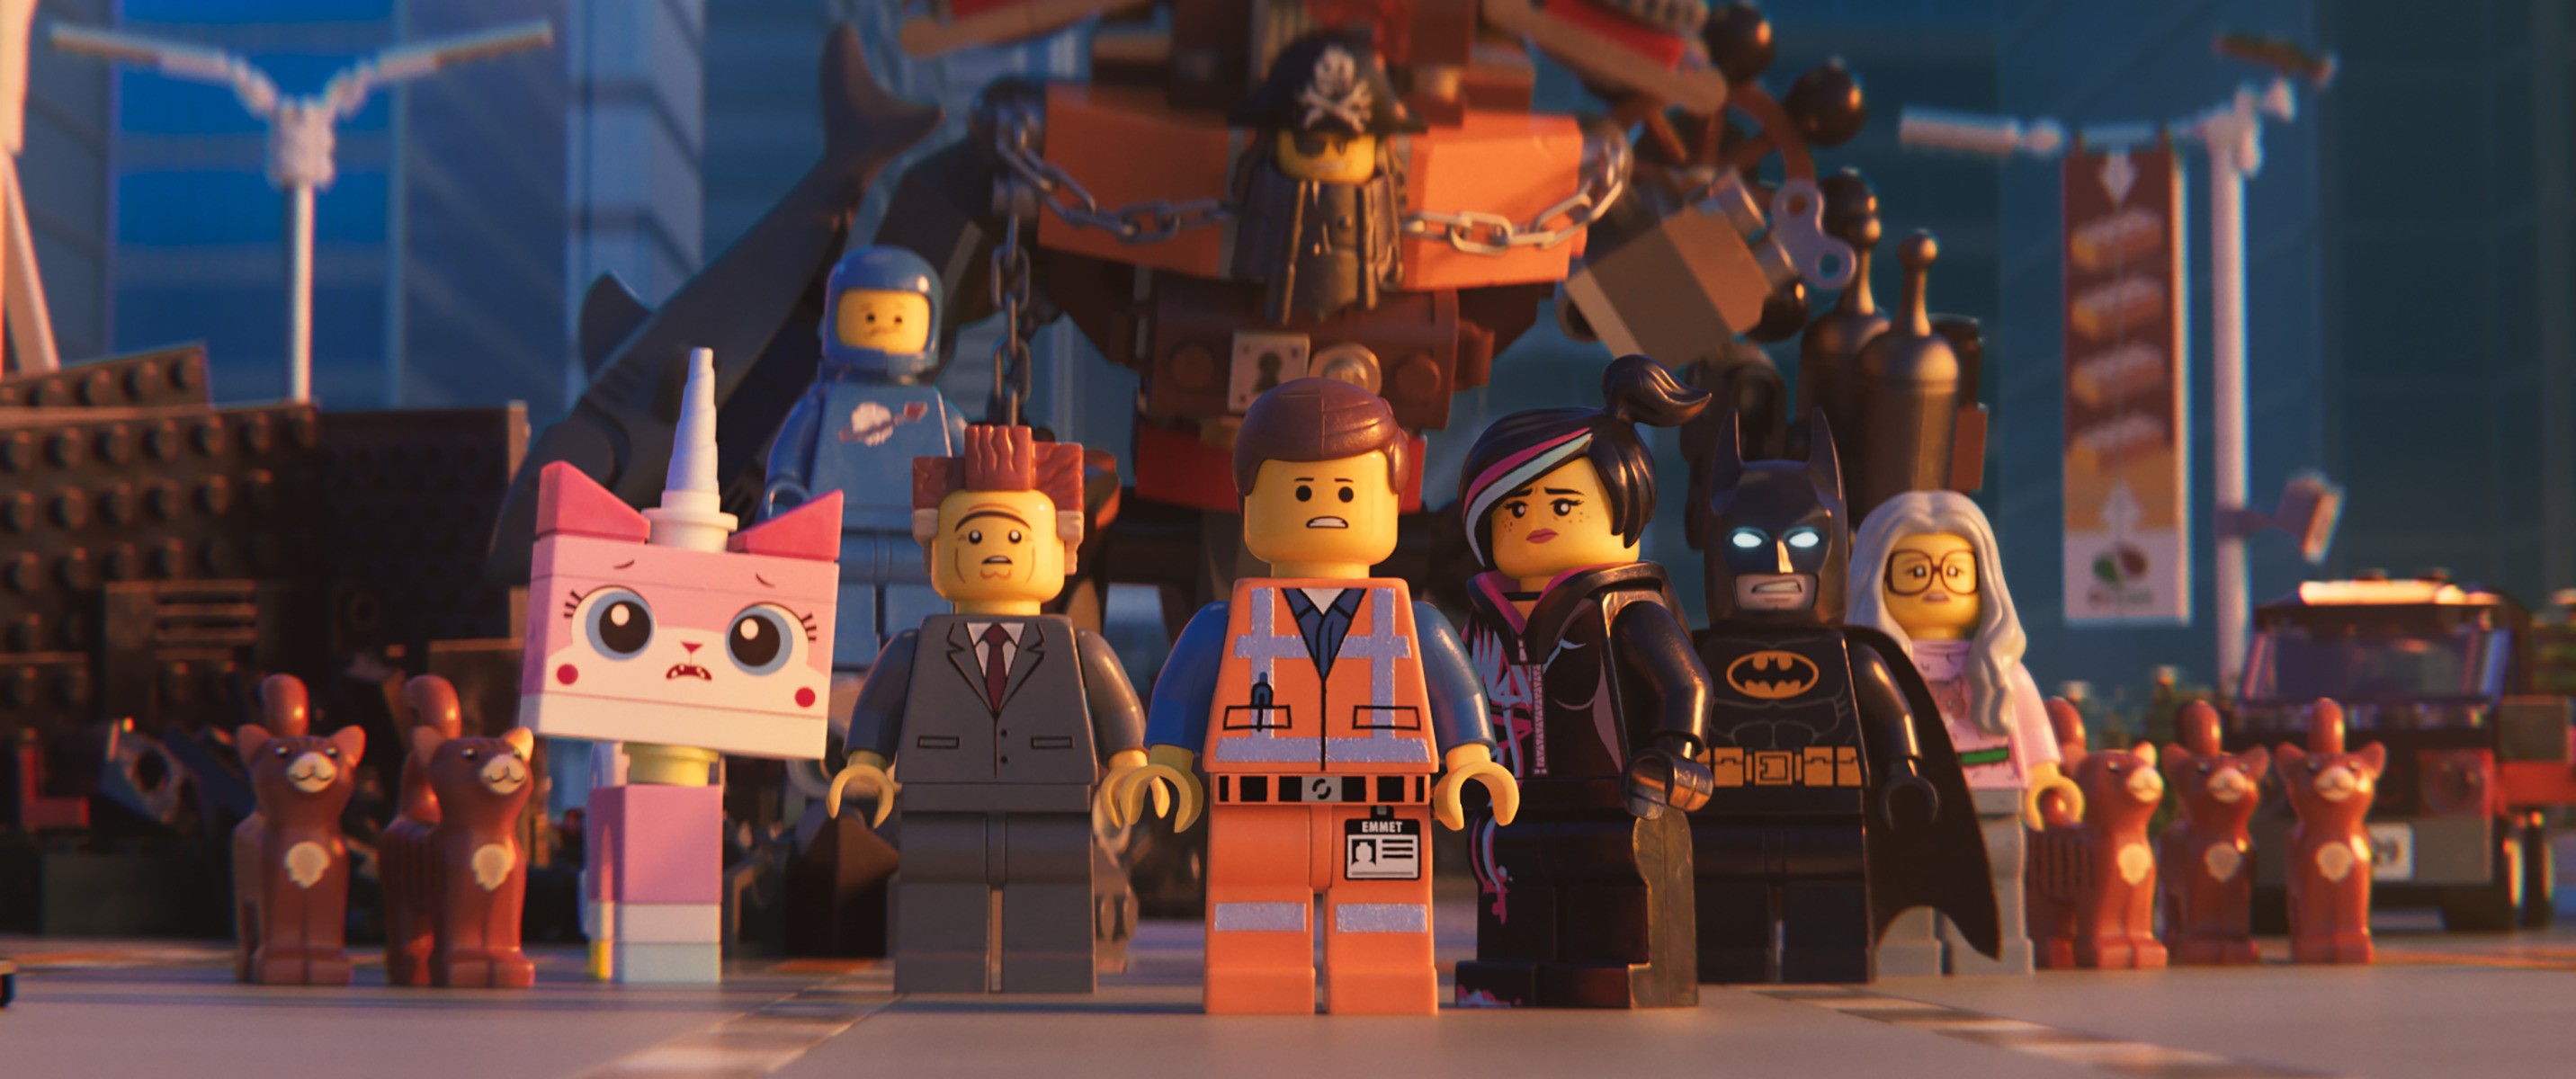 lemmer Relaterede astronomi The LEGO Movie 2: The Second Part - Rotten Tomatoes